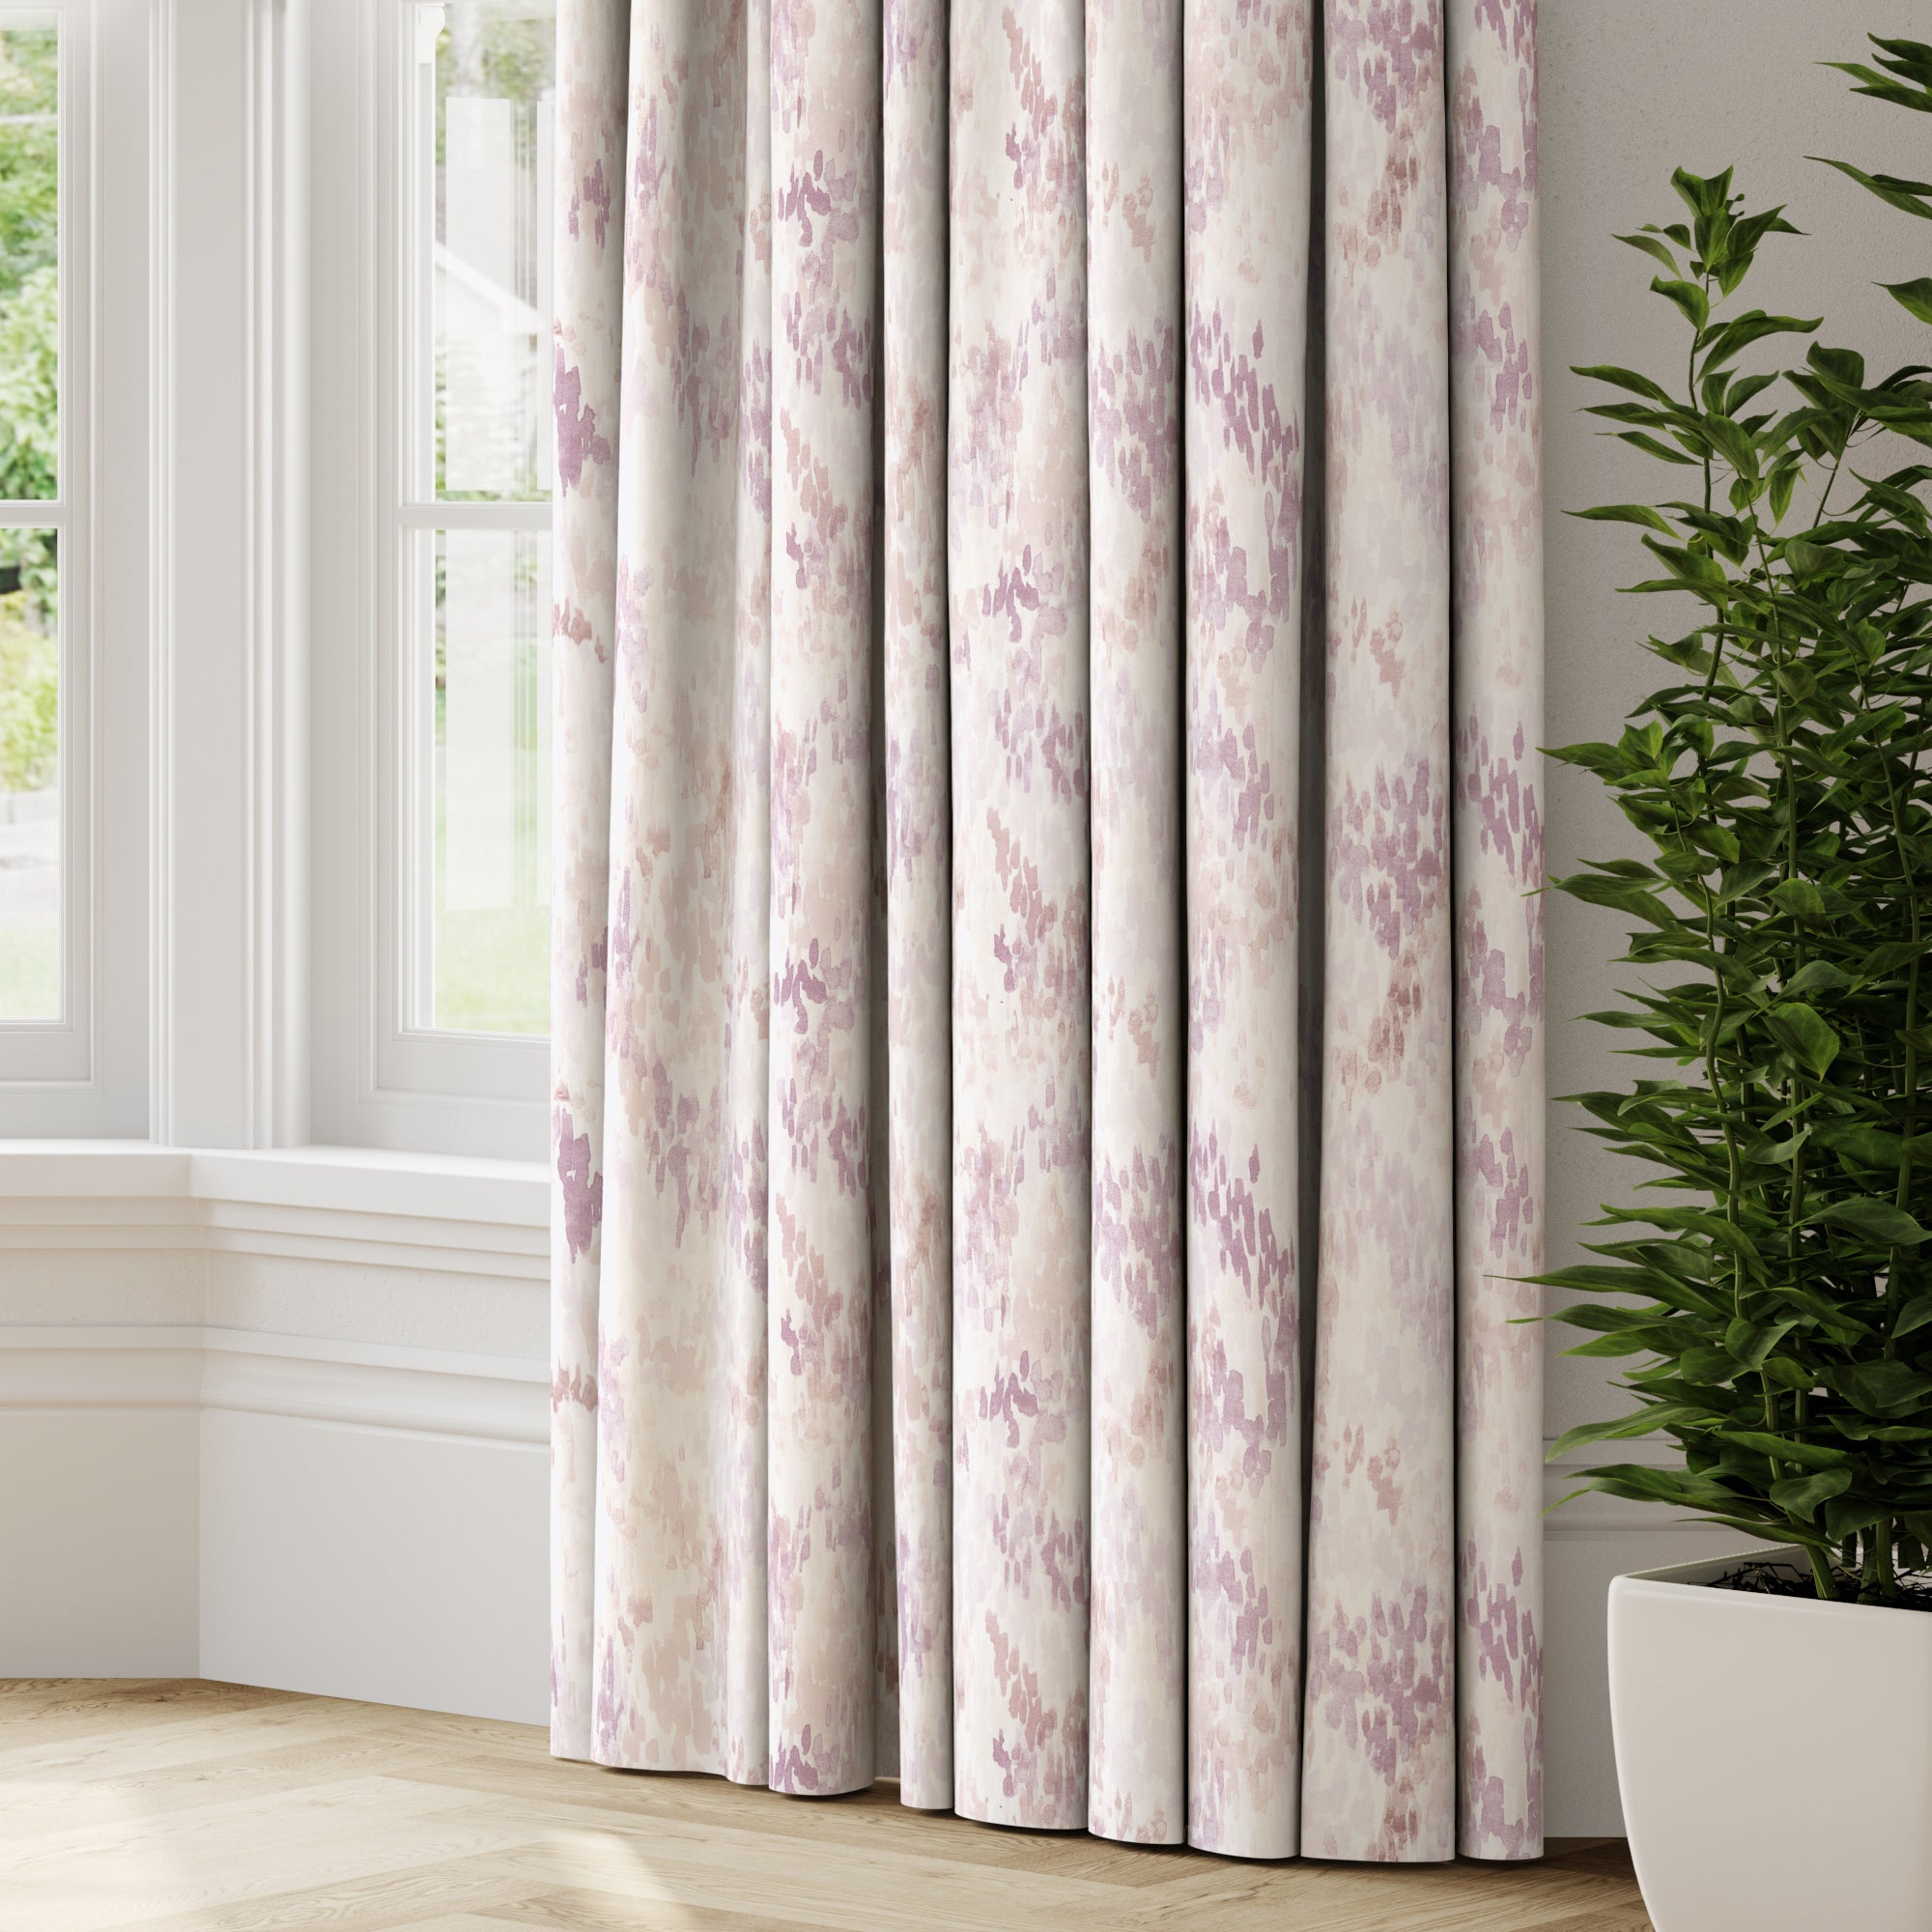 Waves Made to Measure Curtains | Dunelm